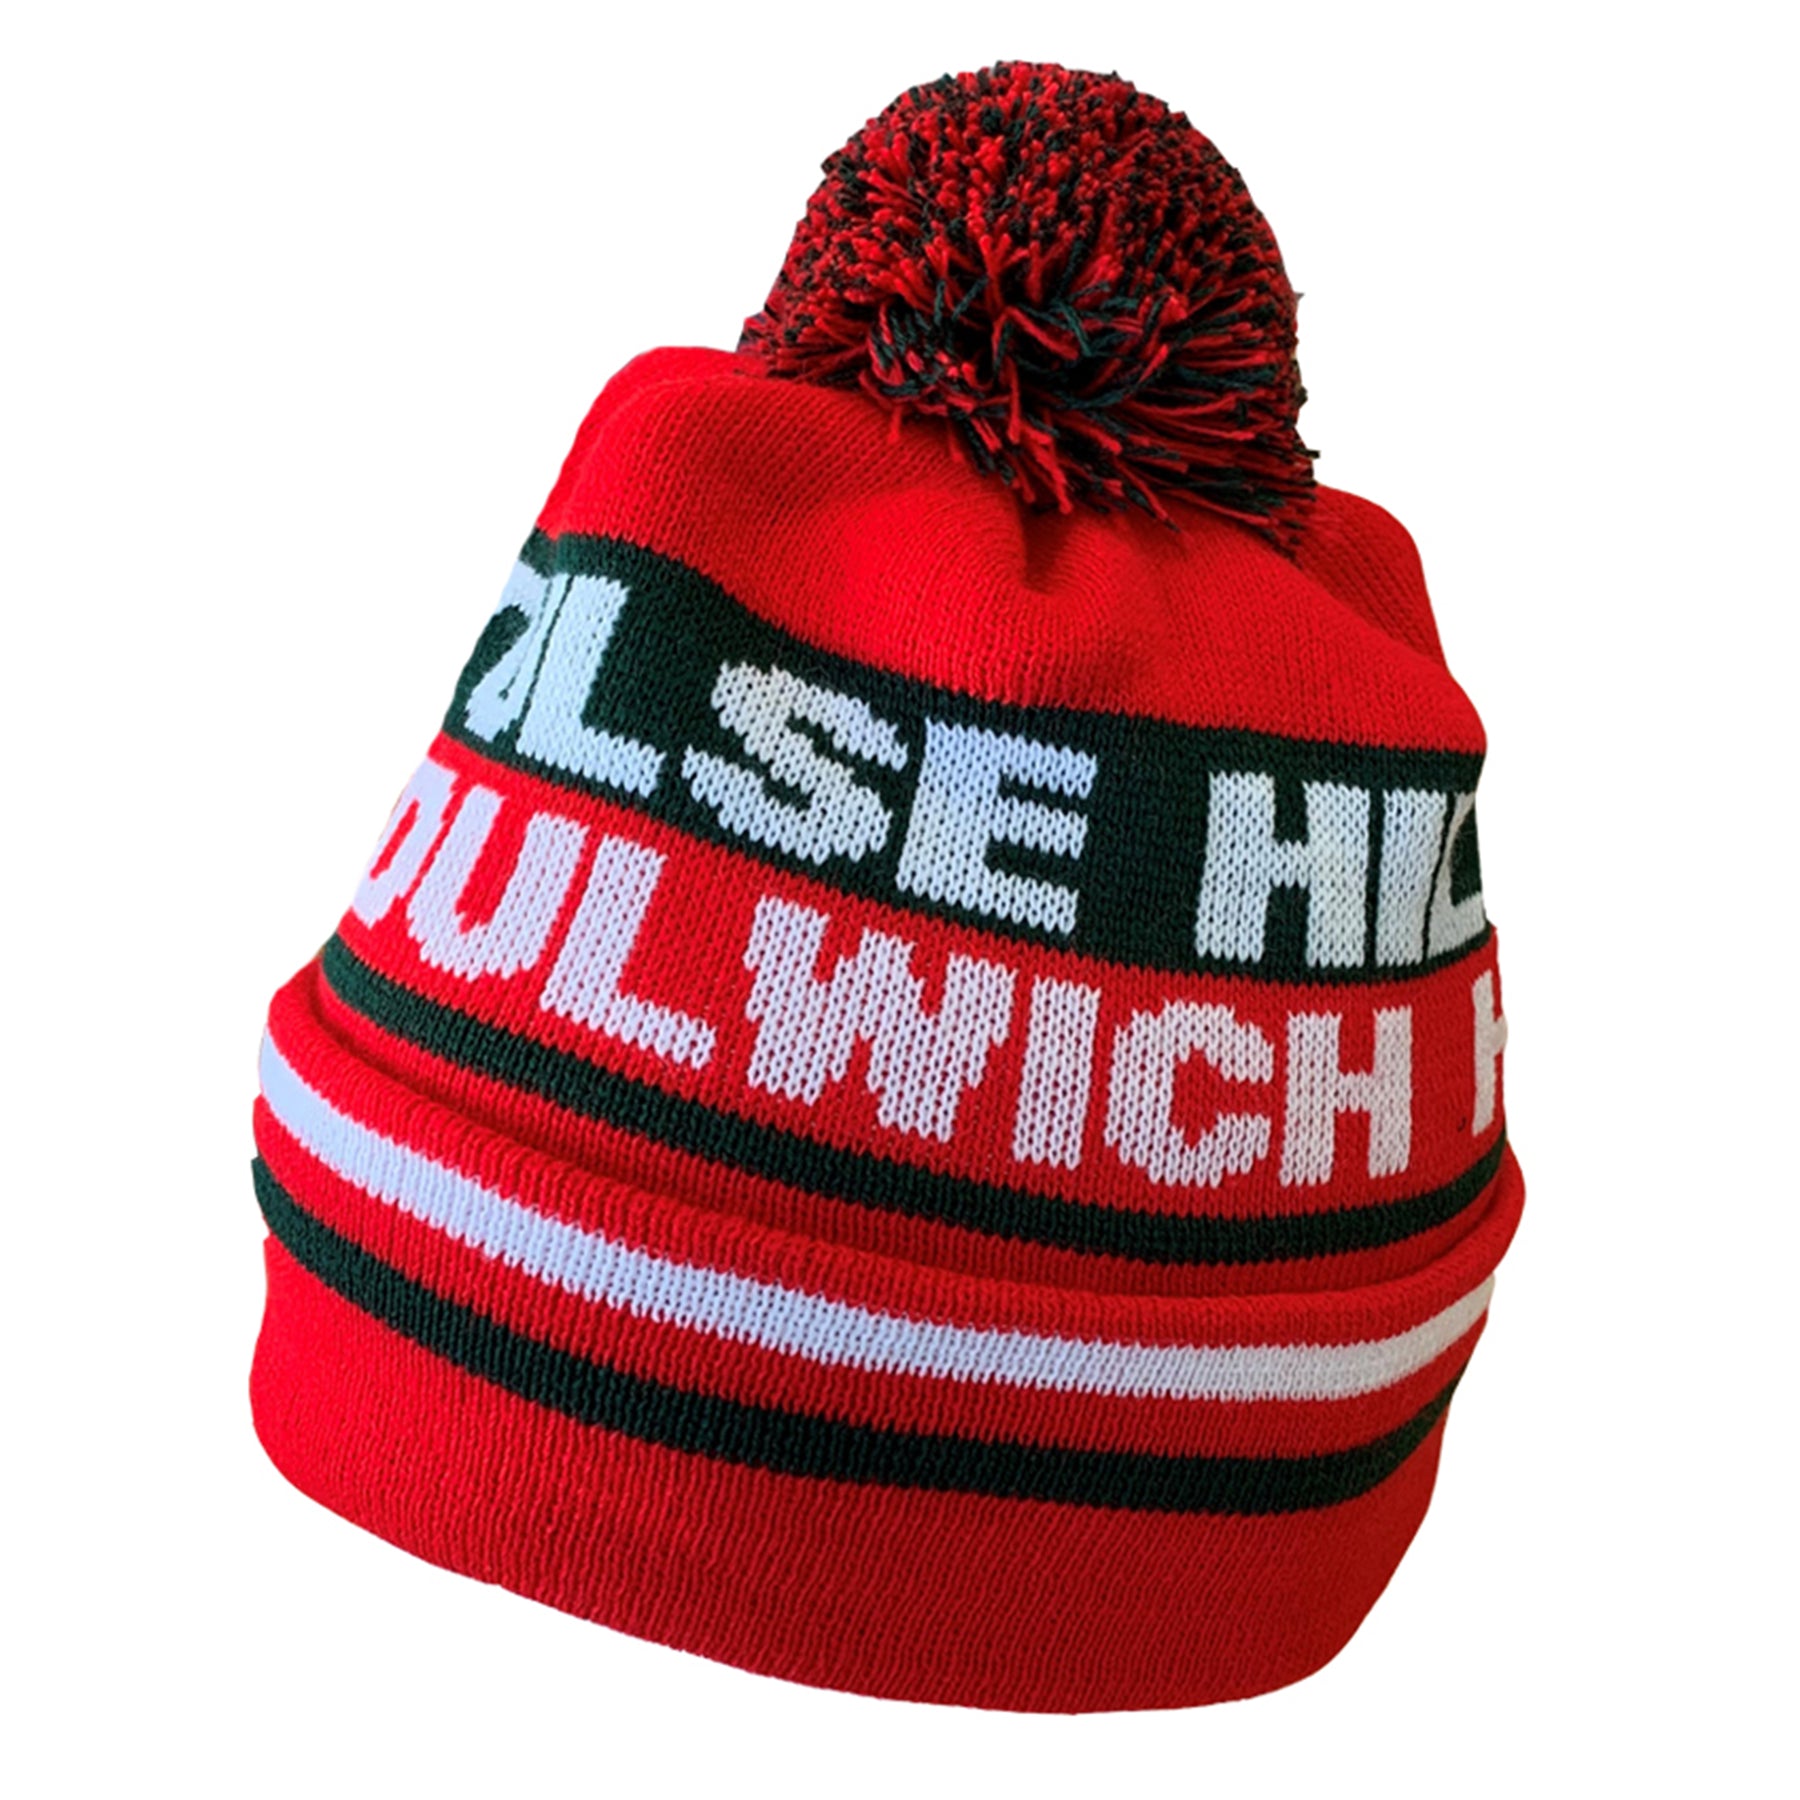 Tulse Hill and Dulwich HC Bobble Hat